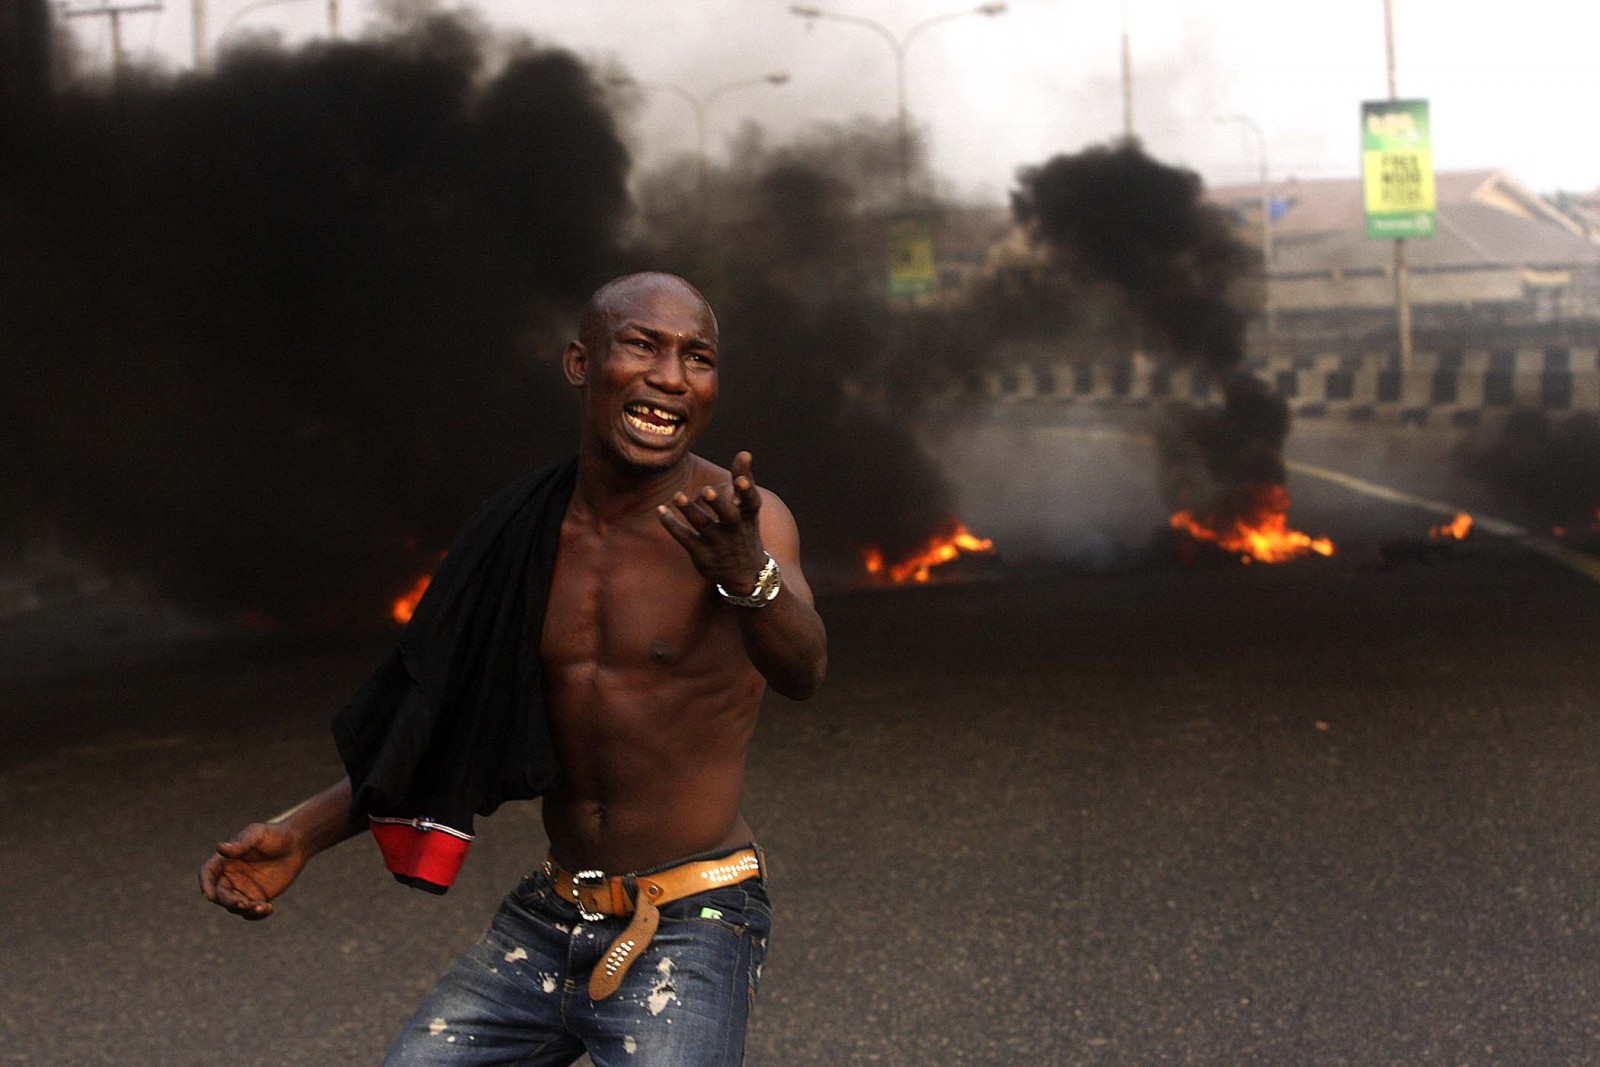 Enugu, A angry youth protests in front